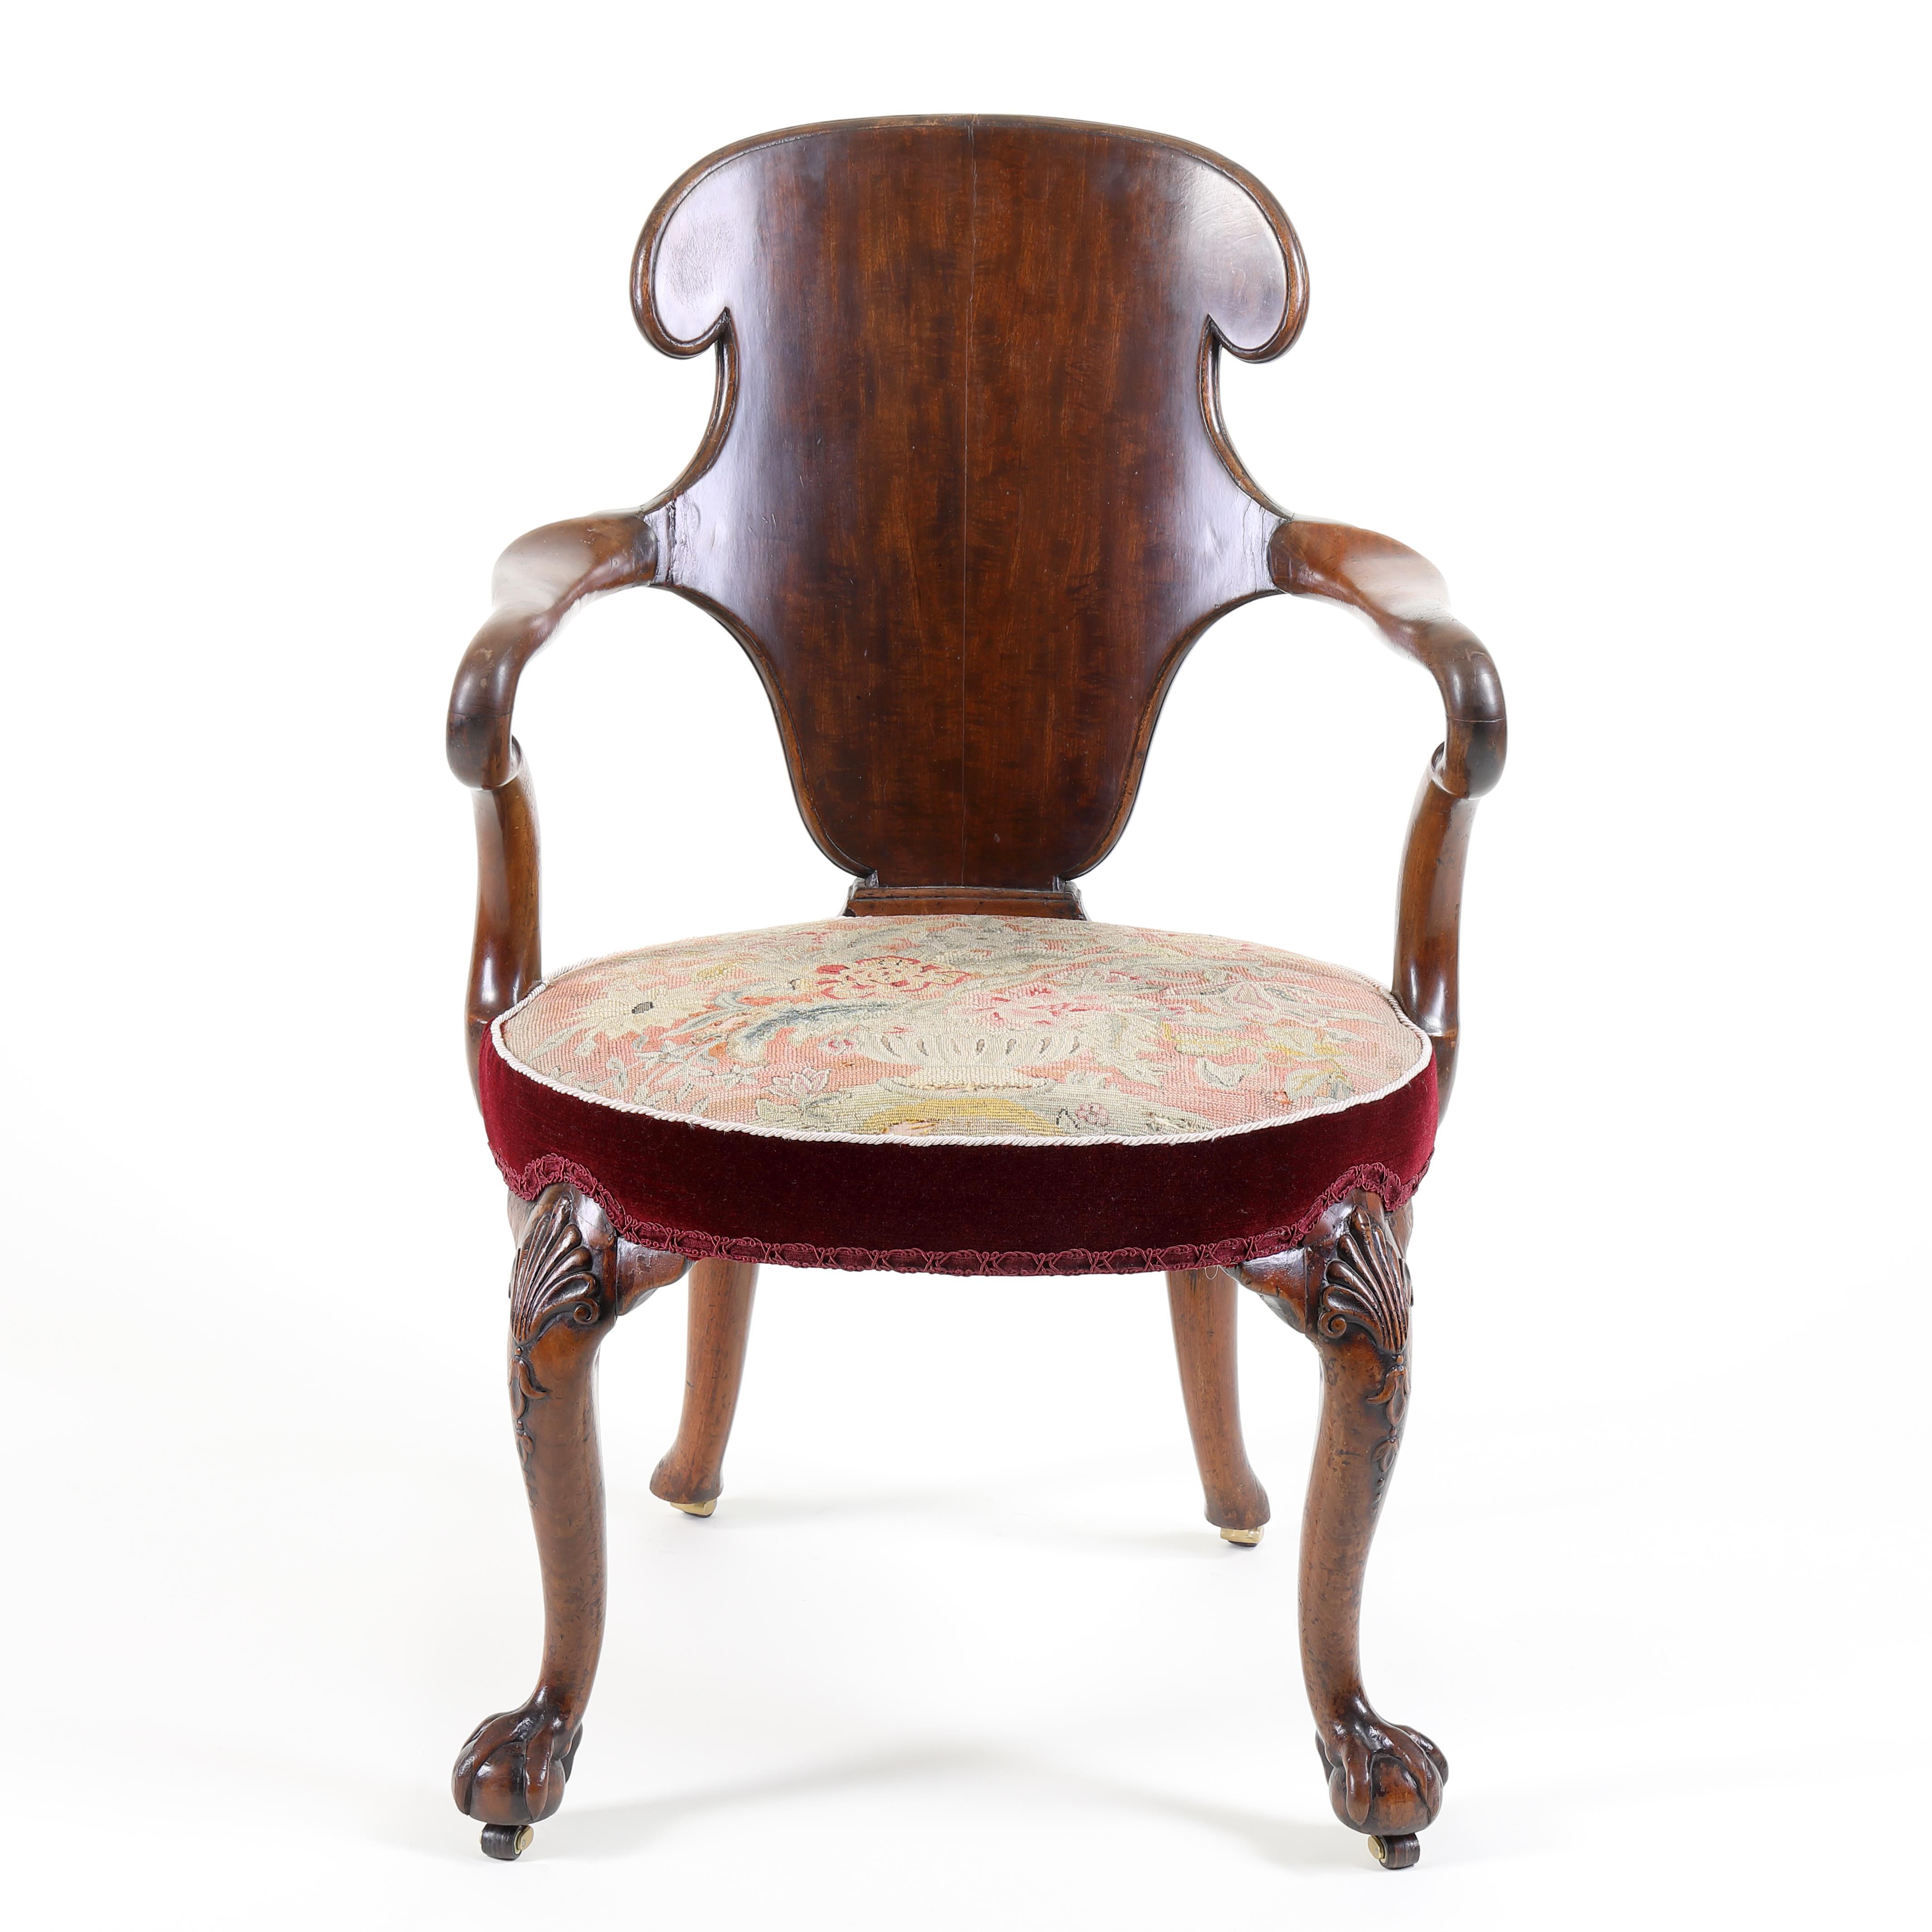 A exceptional and very rare George I period ‘escutcheon-back’ walnut armchair with mahogany back. The well-shaped and curved mahogany back above a circular seat retaining the ORIGINAL TAPESTRY cover, with two scrolled and out-swept arms. Standing on